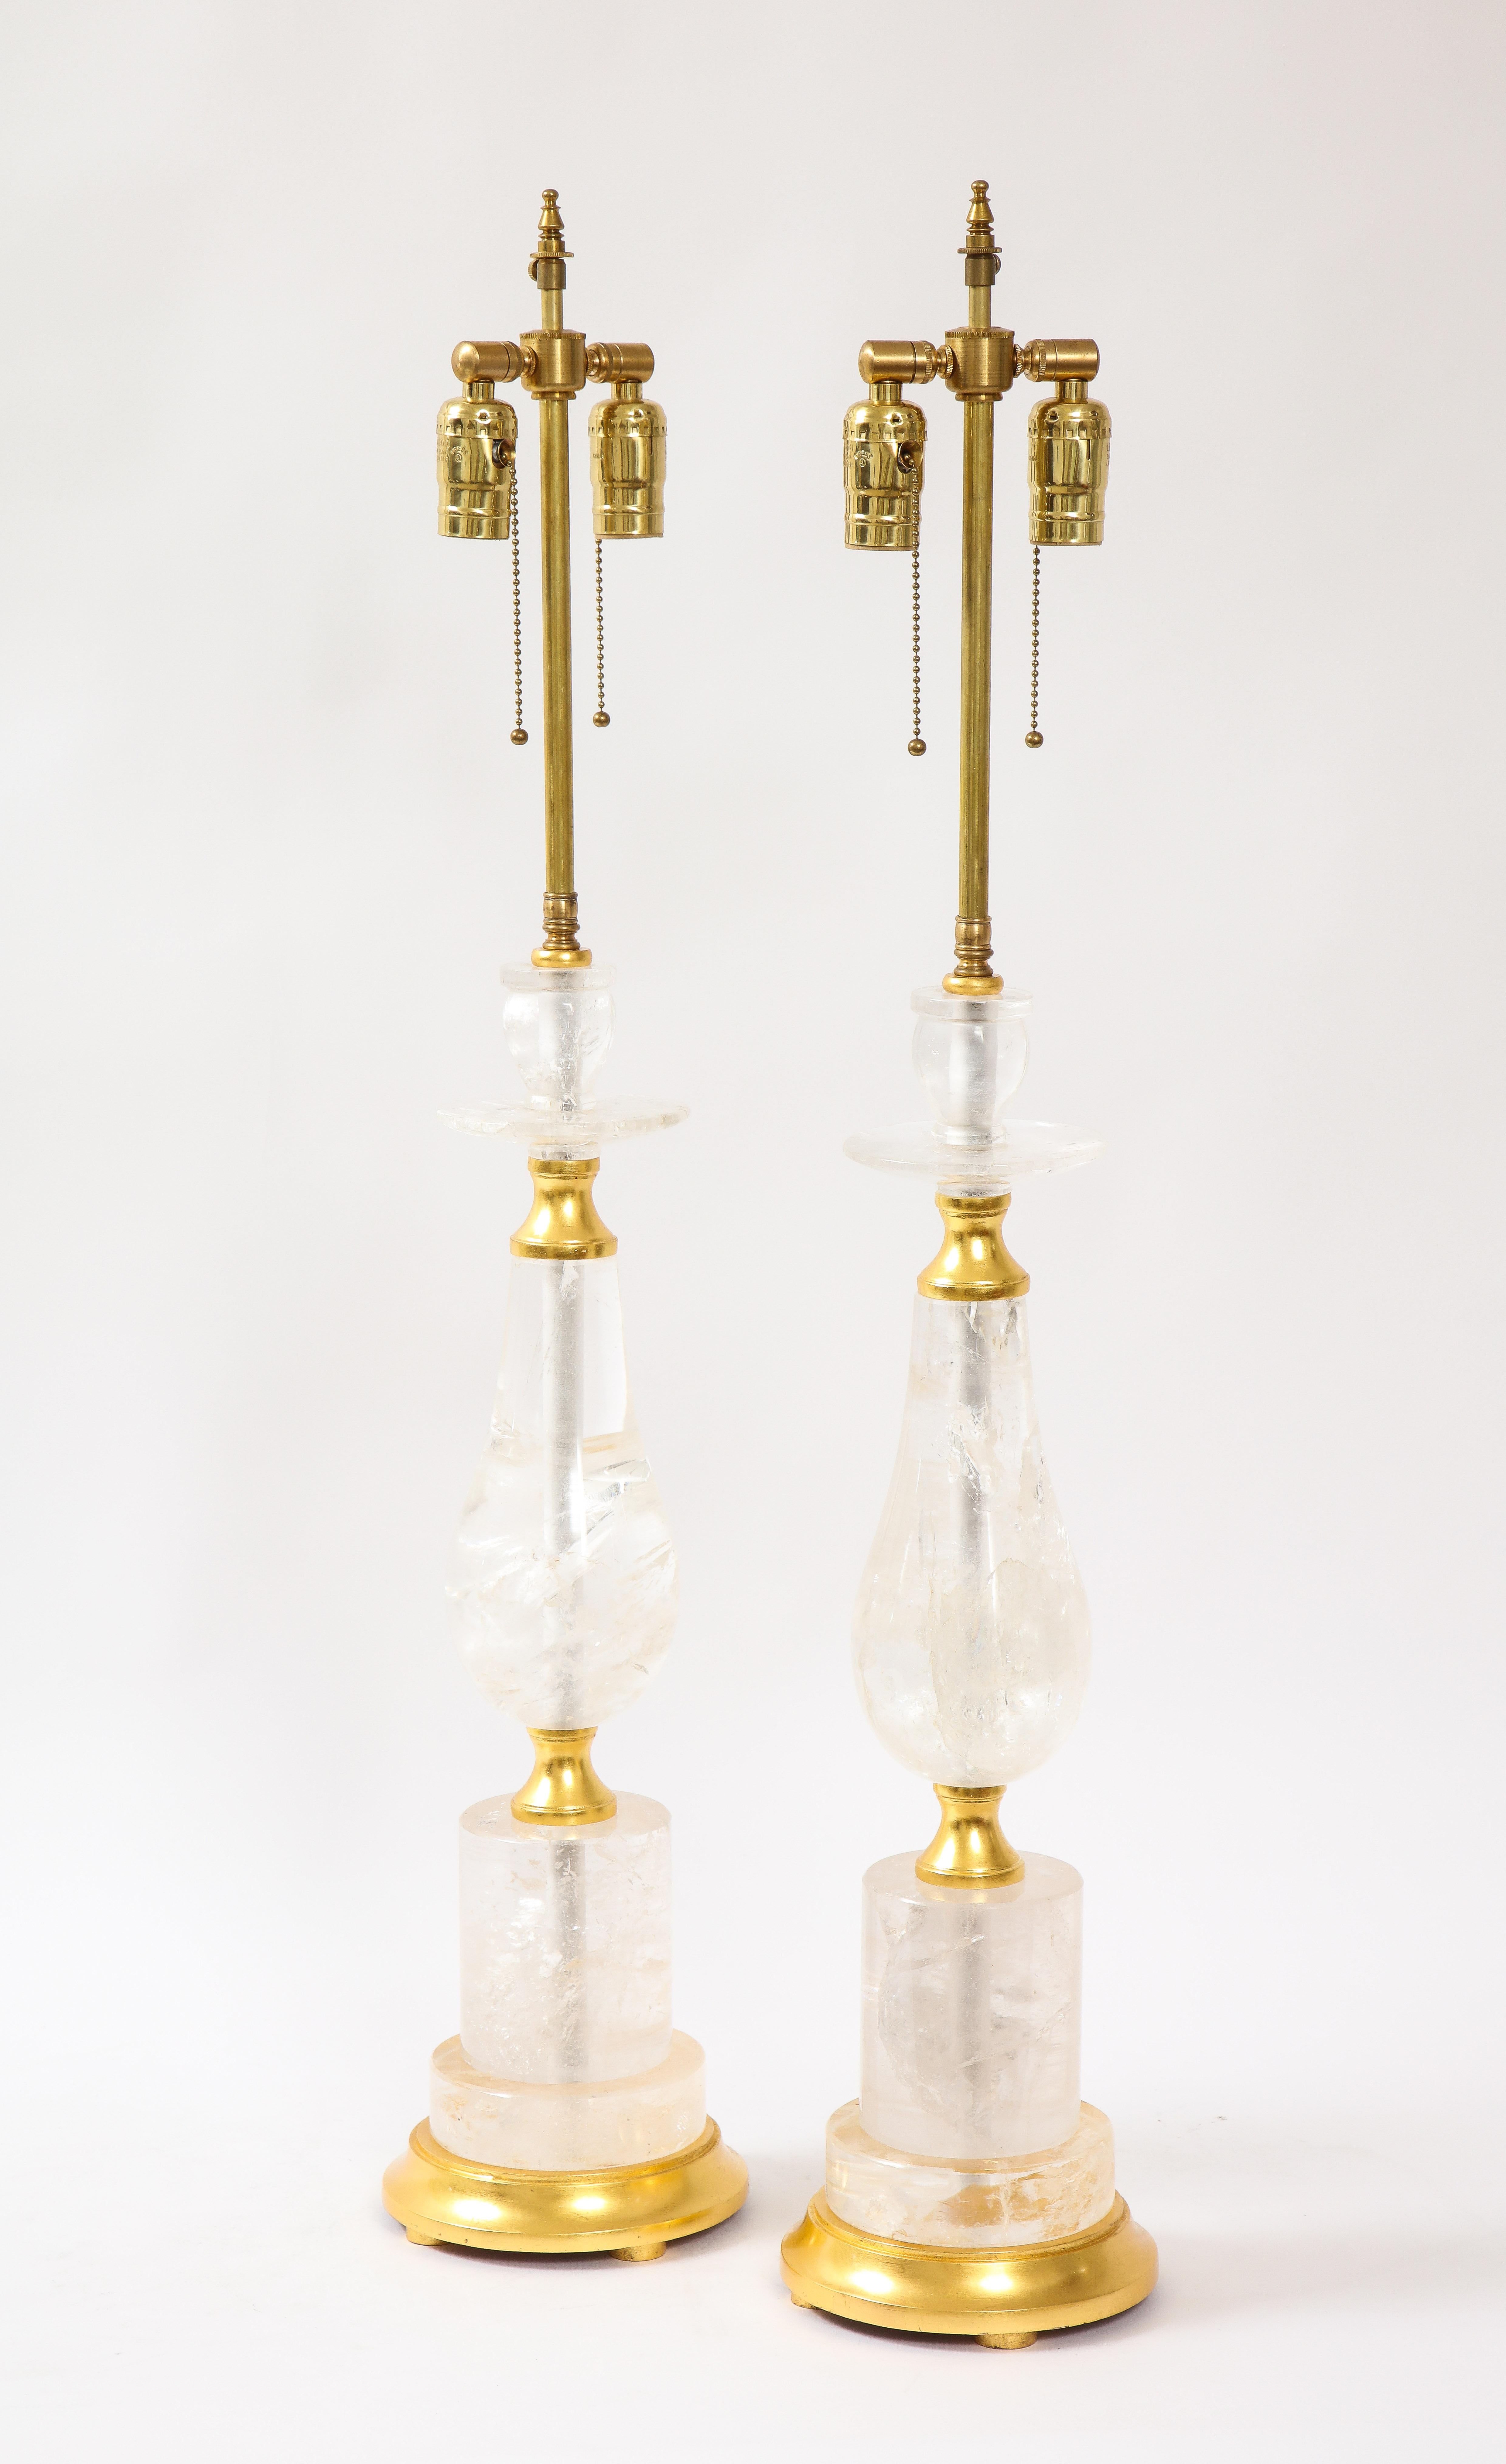 Hand-Carved Pair of Mid-Century Modern Rock Crystal Quartz Mounted Lamps, Att. to 